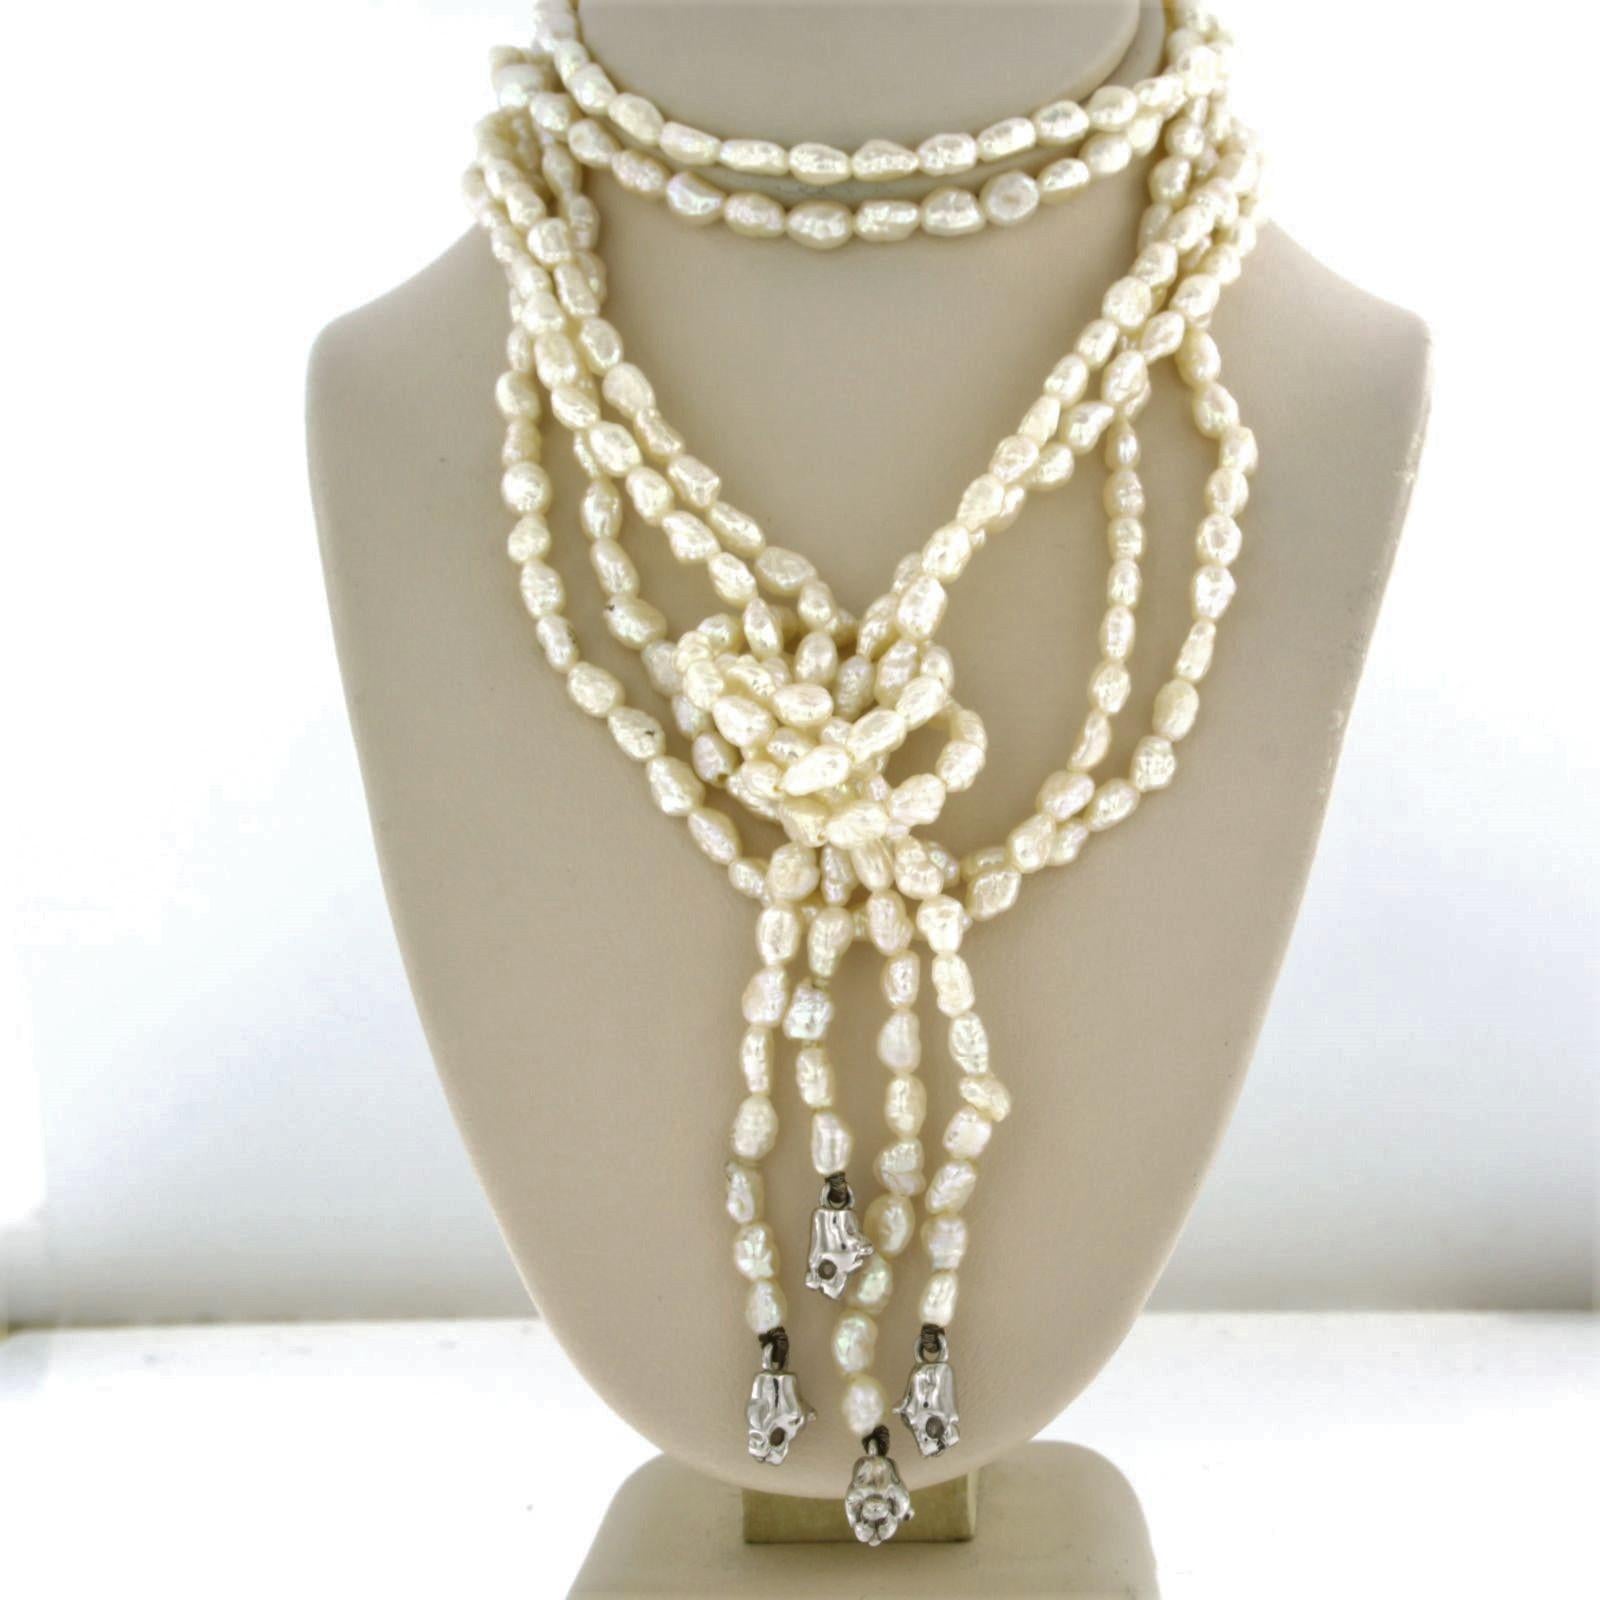 Two pearl necklaces with 18k white gold panther heads at the ends

Detailed description:

Each necklace is about 93 long
Panther heads are about 0.7 cm x 0.5 cm.

Total weight 35.5 grams (of these two necklace)

occupied with

- 3 x 93 cm row of